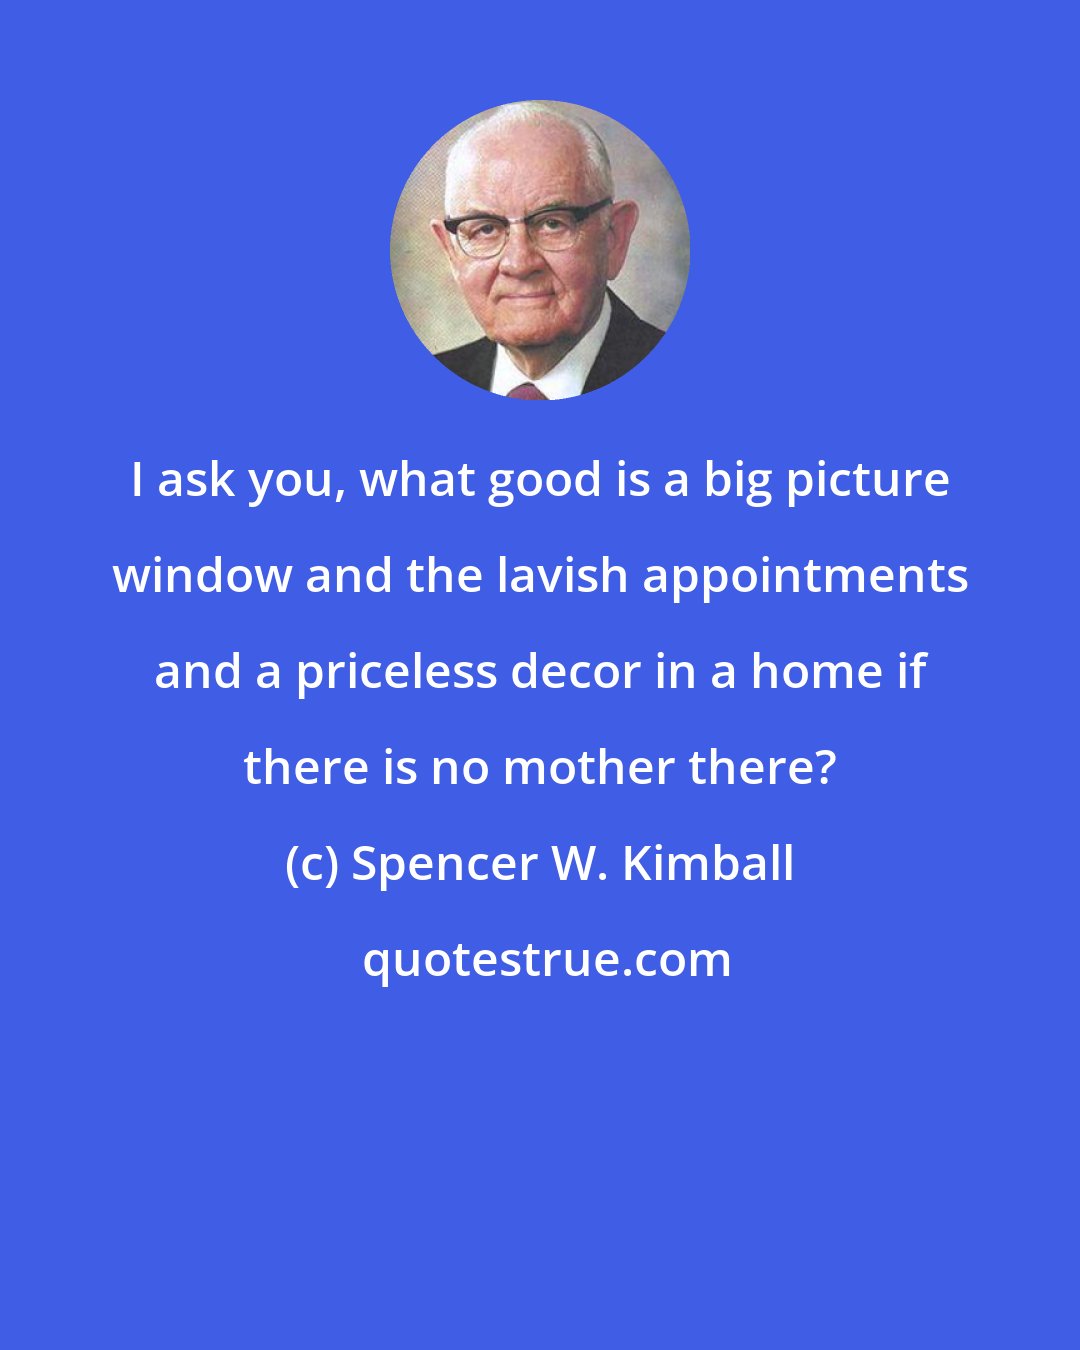 Spencer W. Kimball: I ask you, what good is a big picture window and the lavish appointments and a priceless decor in a home if there is no mother there?